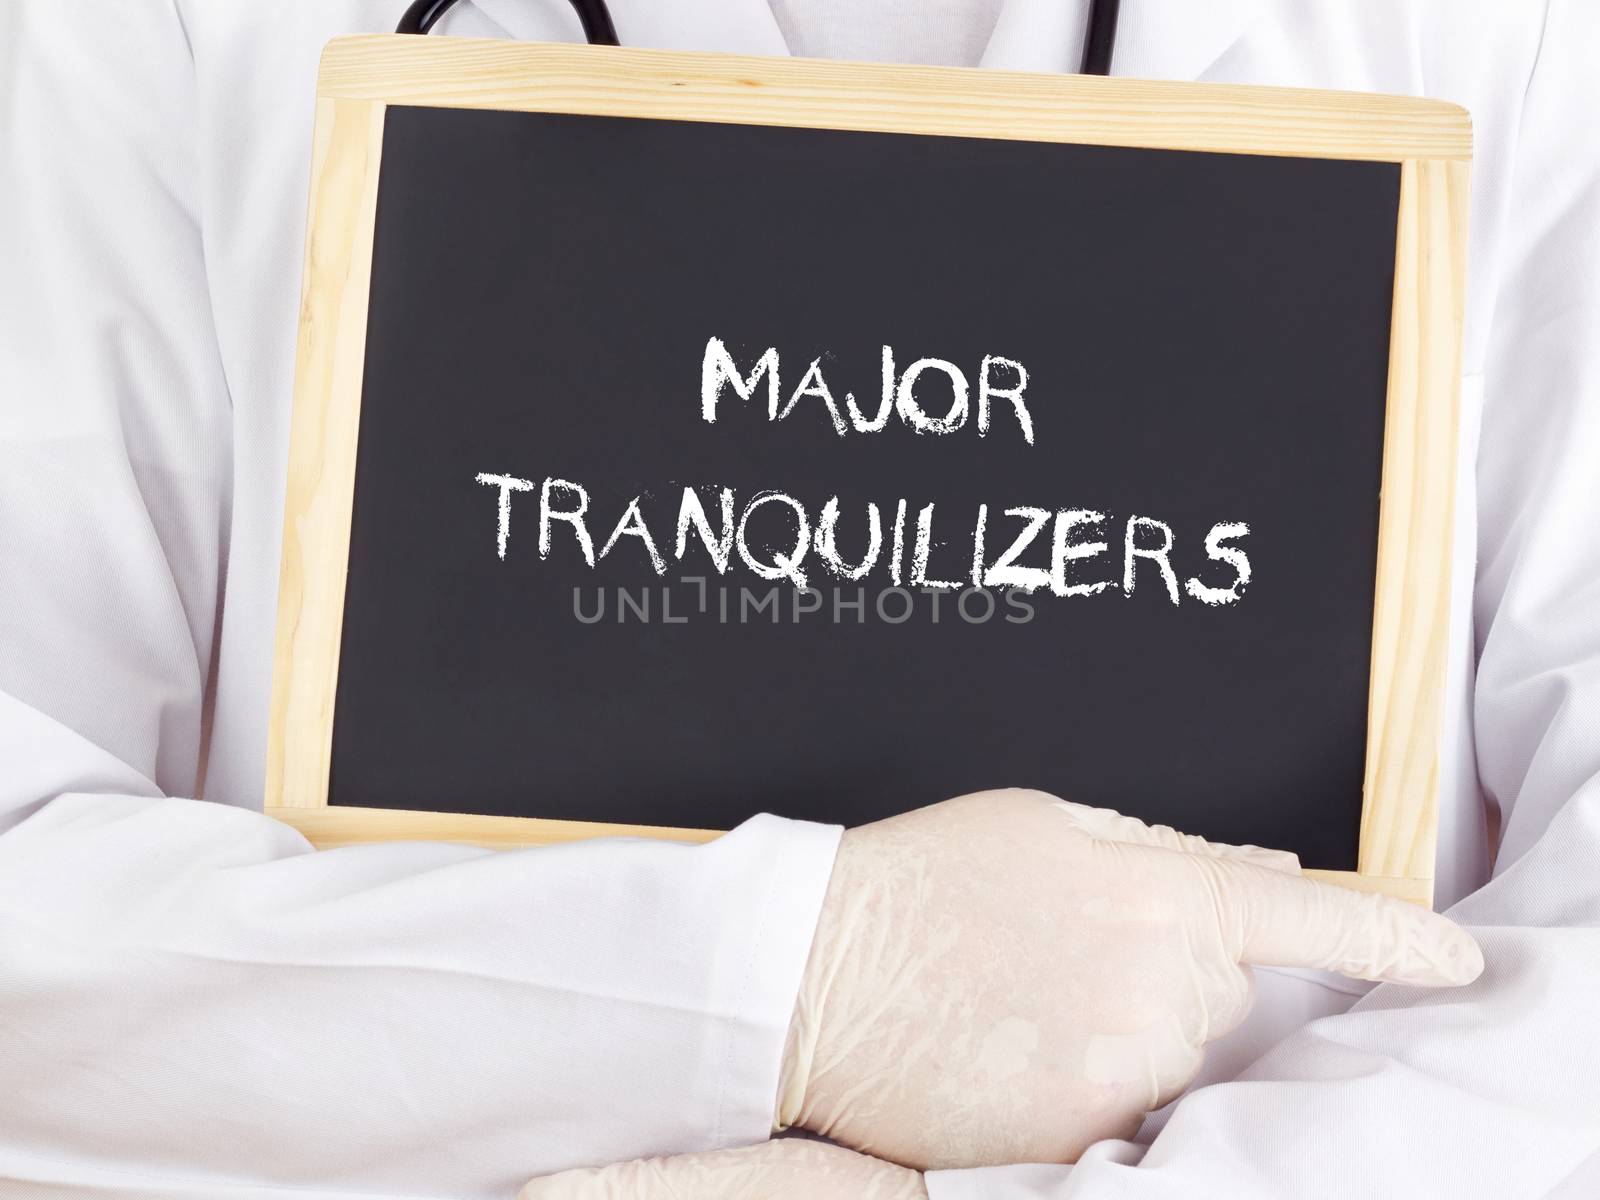 Doctor shows information: major tranquilizers by gwolters